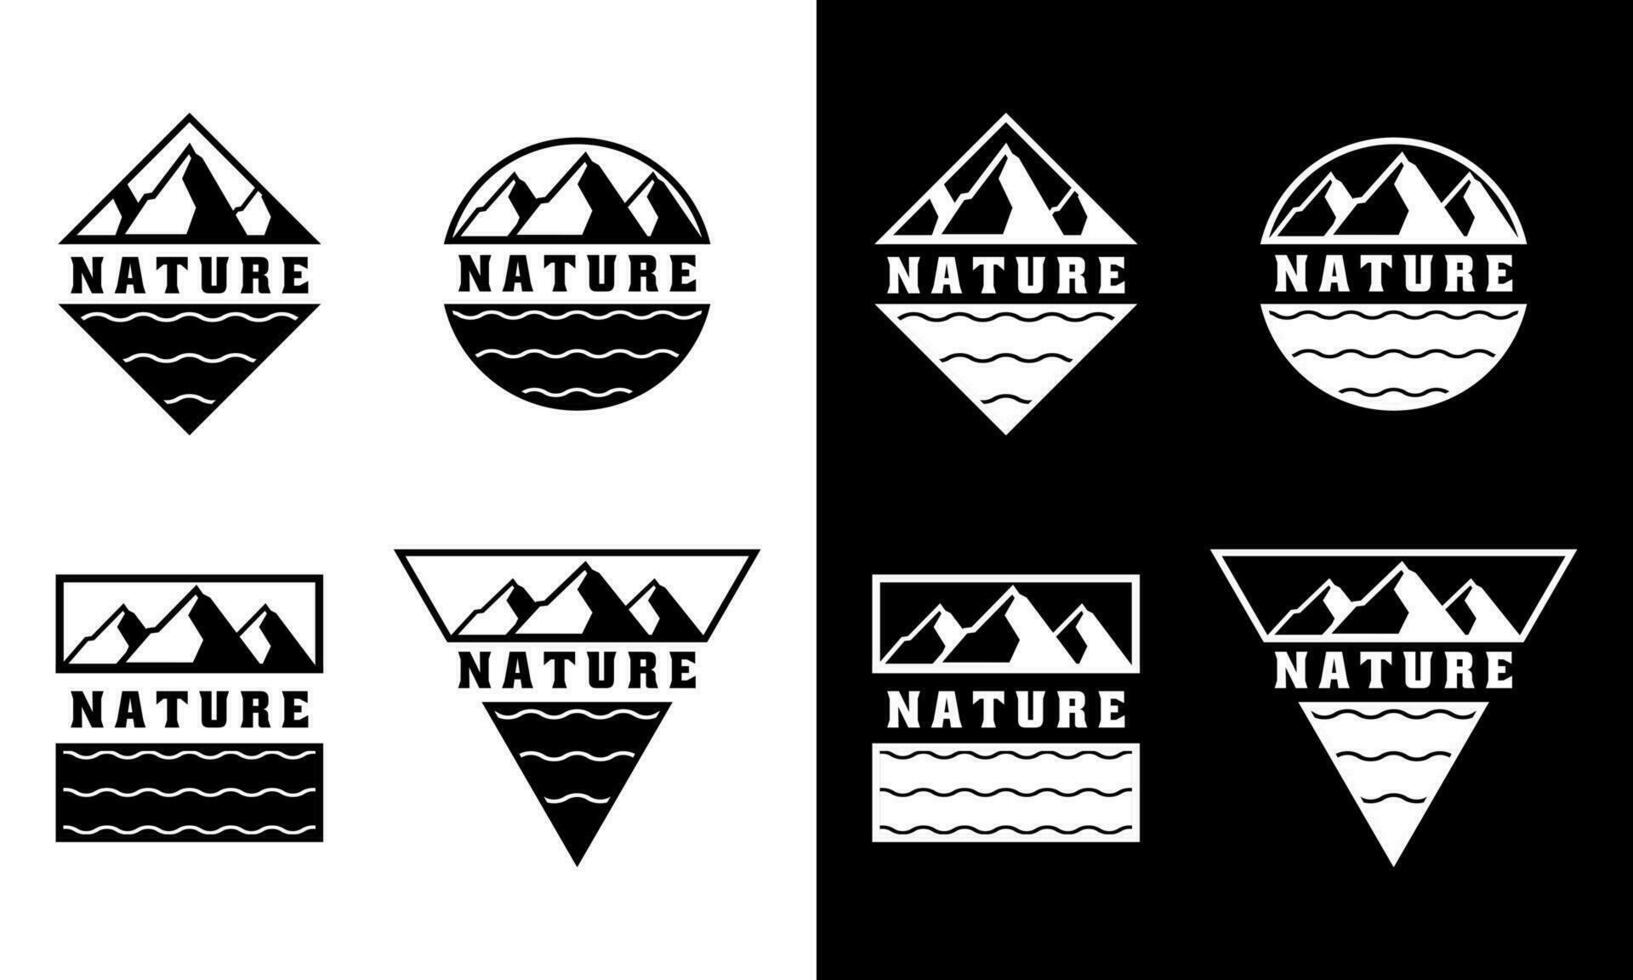 Nature and adventure vector logo set. It is suitable for logos of nature lovers, adventurers, mountain climbers, scouts, communities, brands, and others.